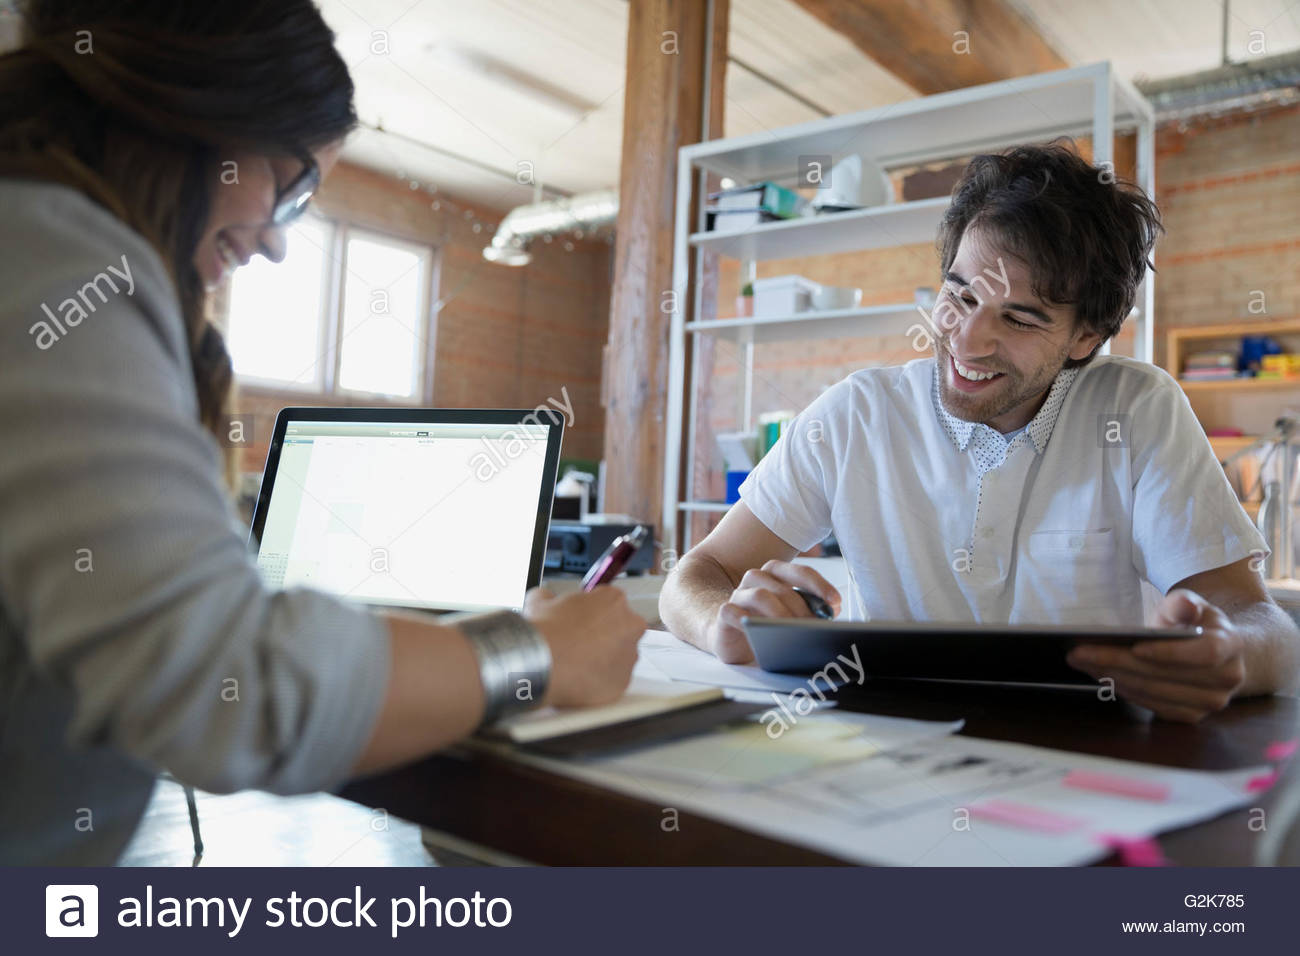 Designers with laptop and digital tablet discussing plans in office Stock Photo